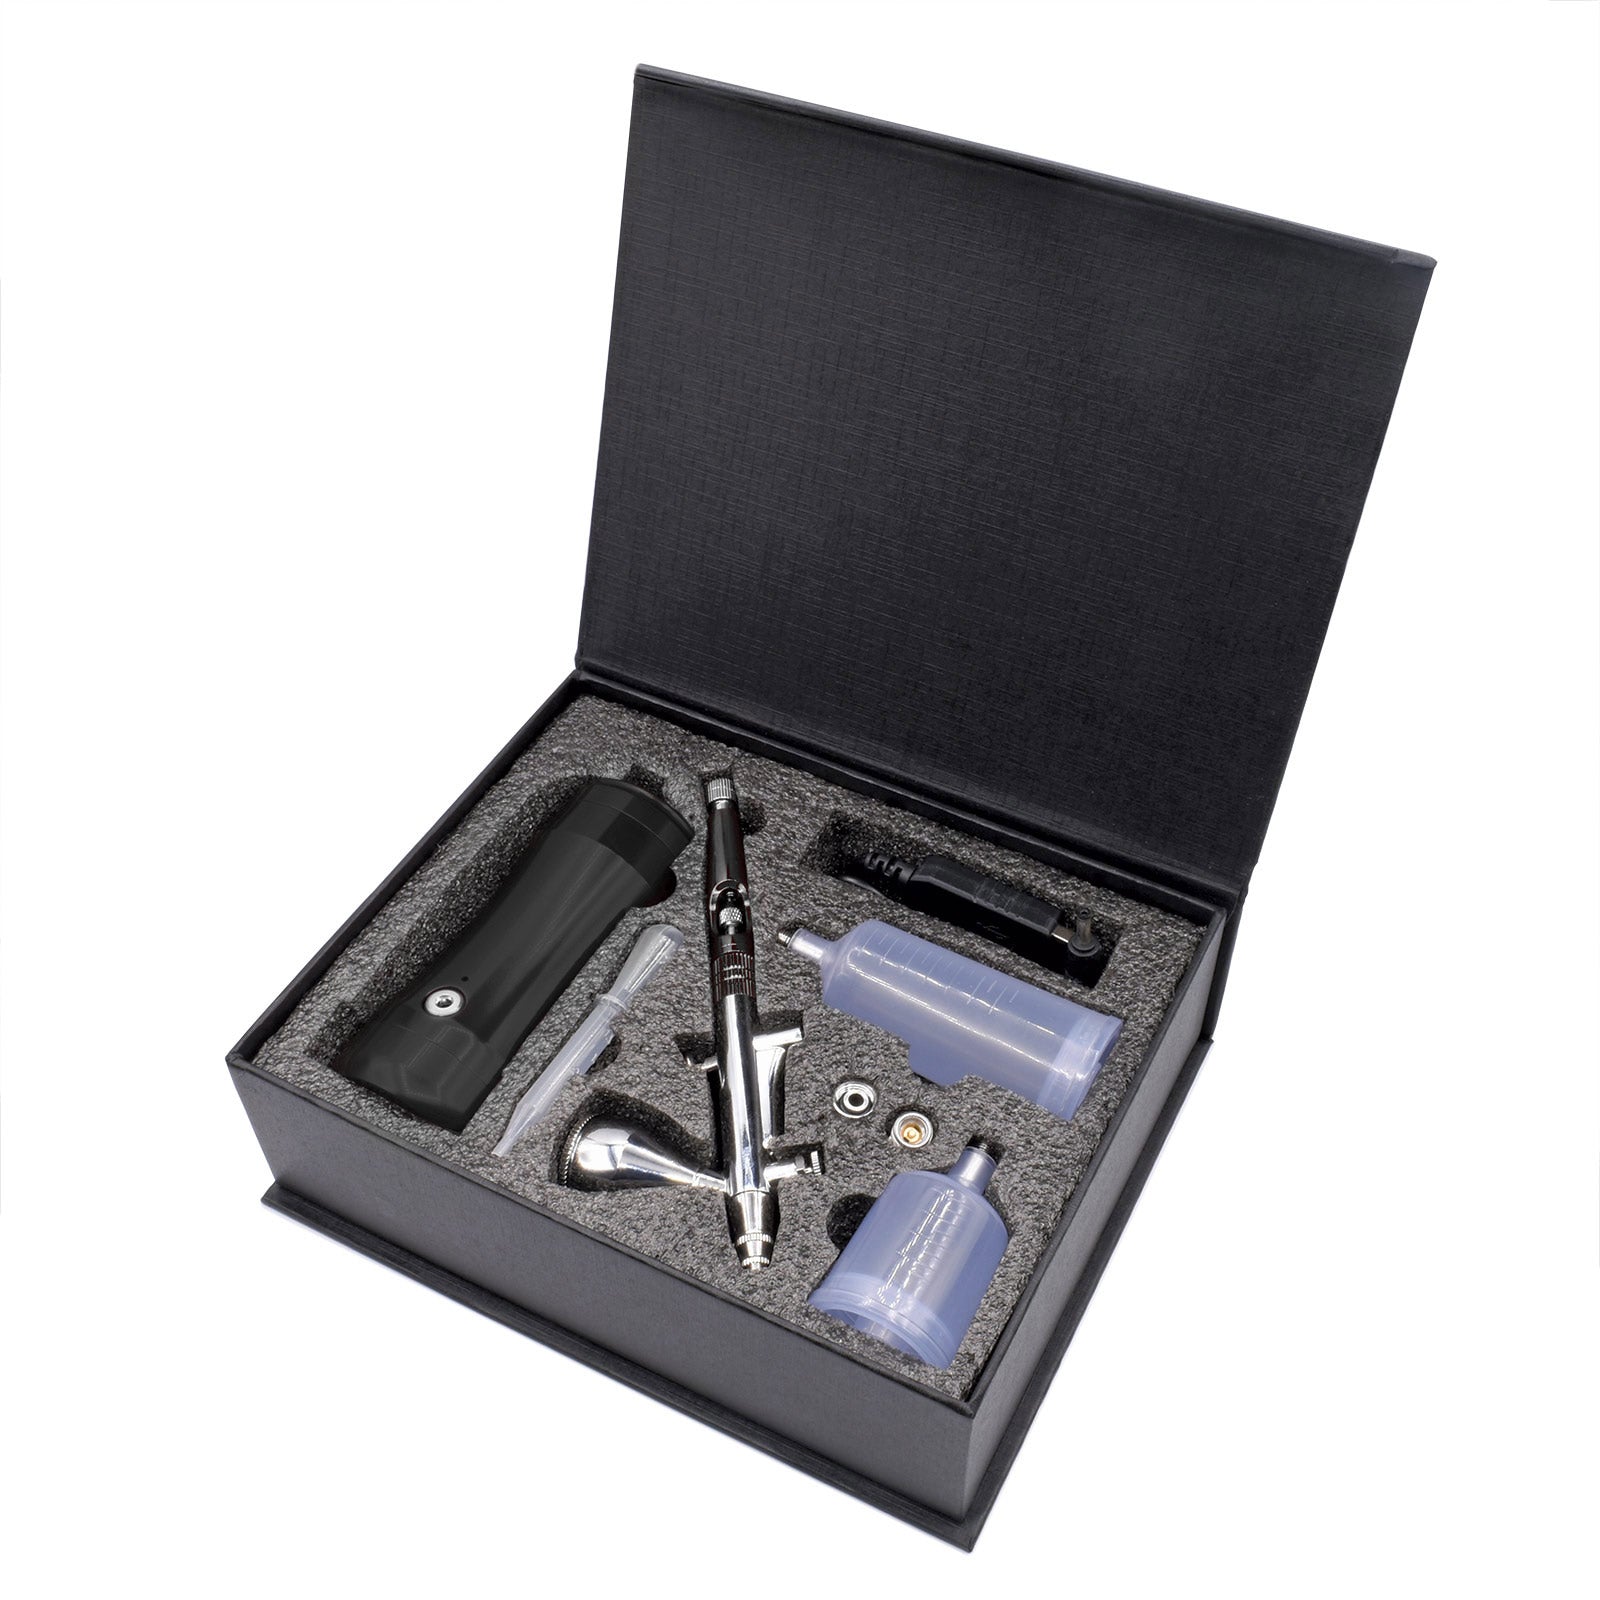 Micro-Mark Self-Contained Portable Broad-Spray Airbrush Set